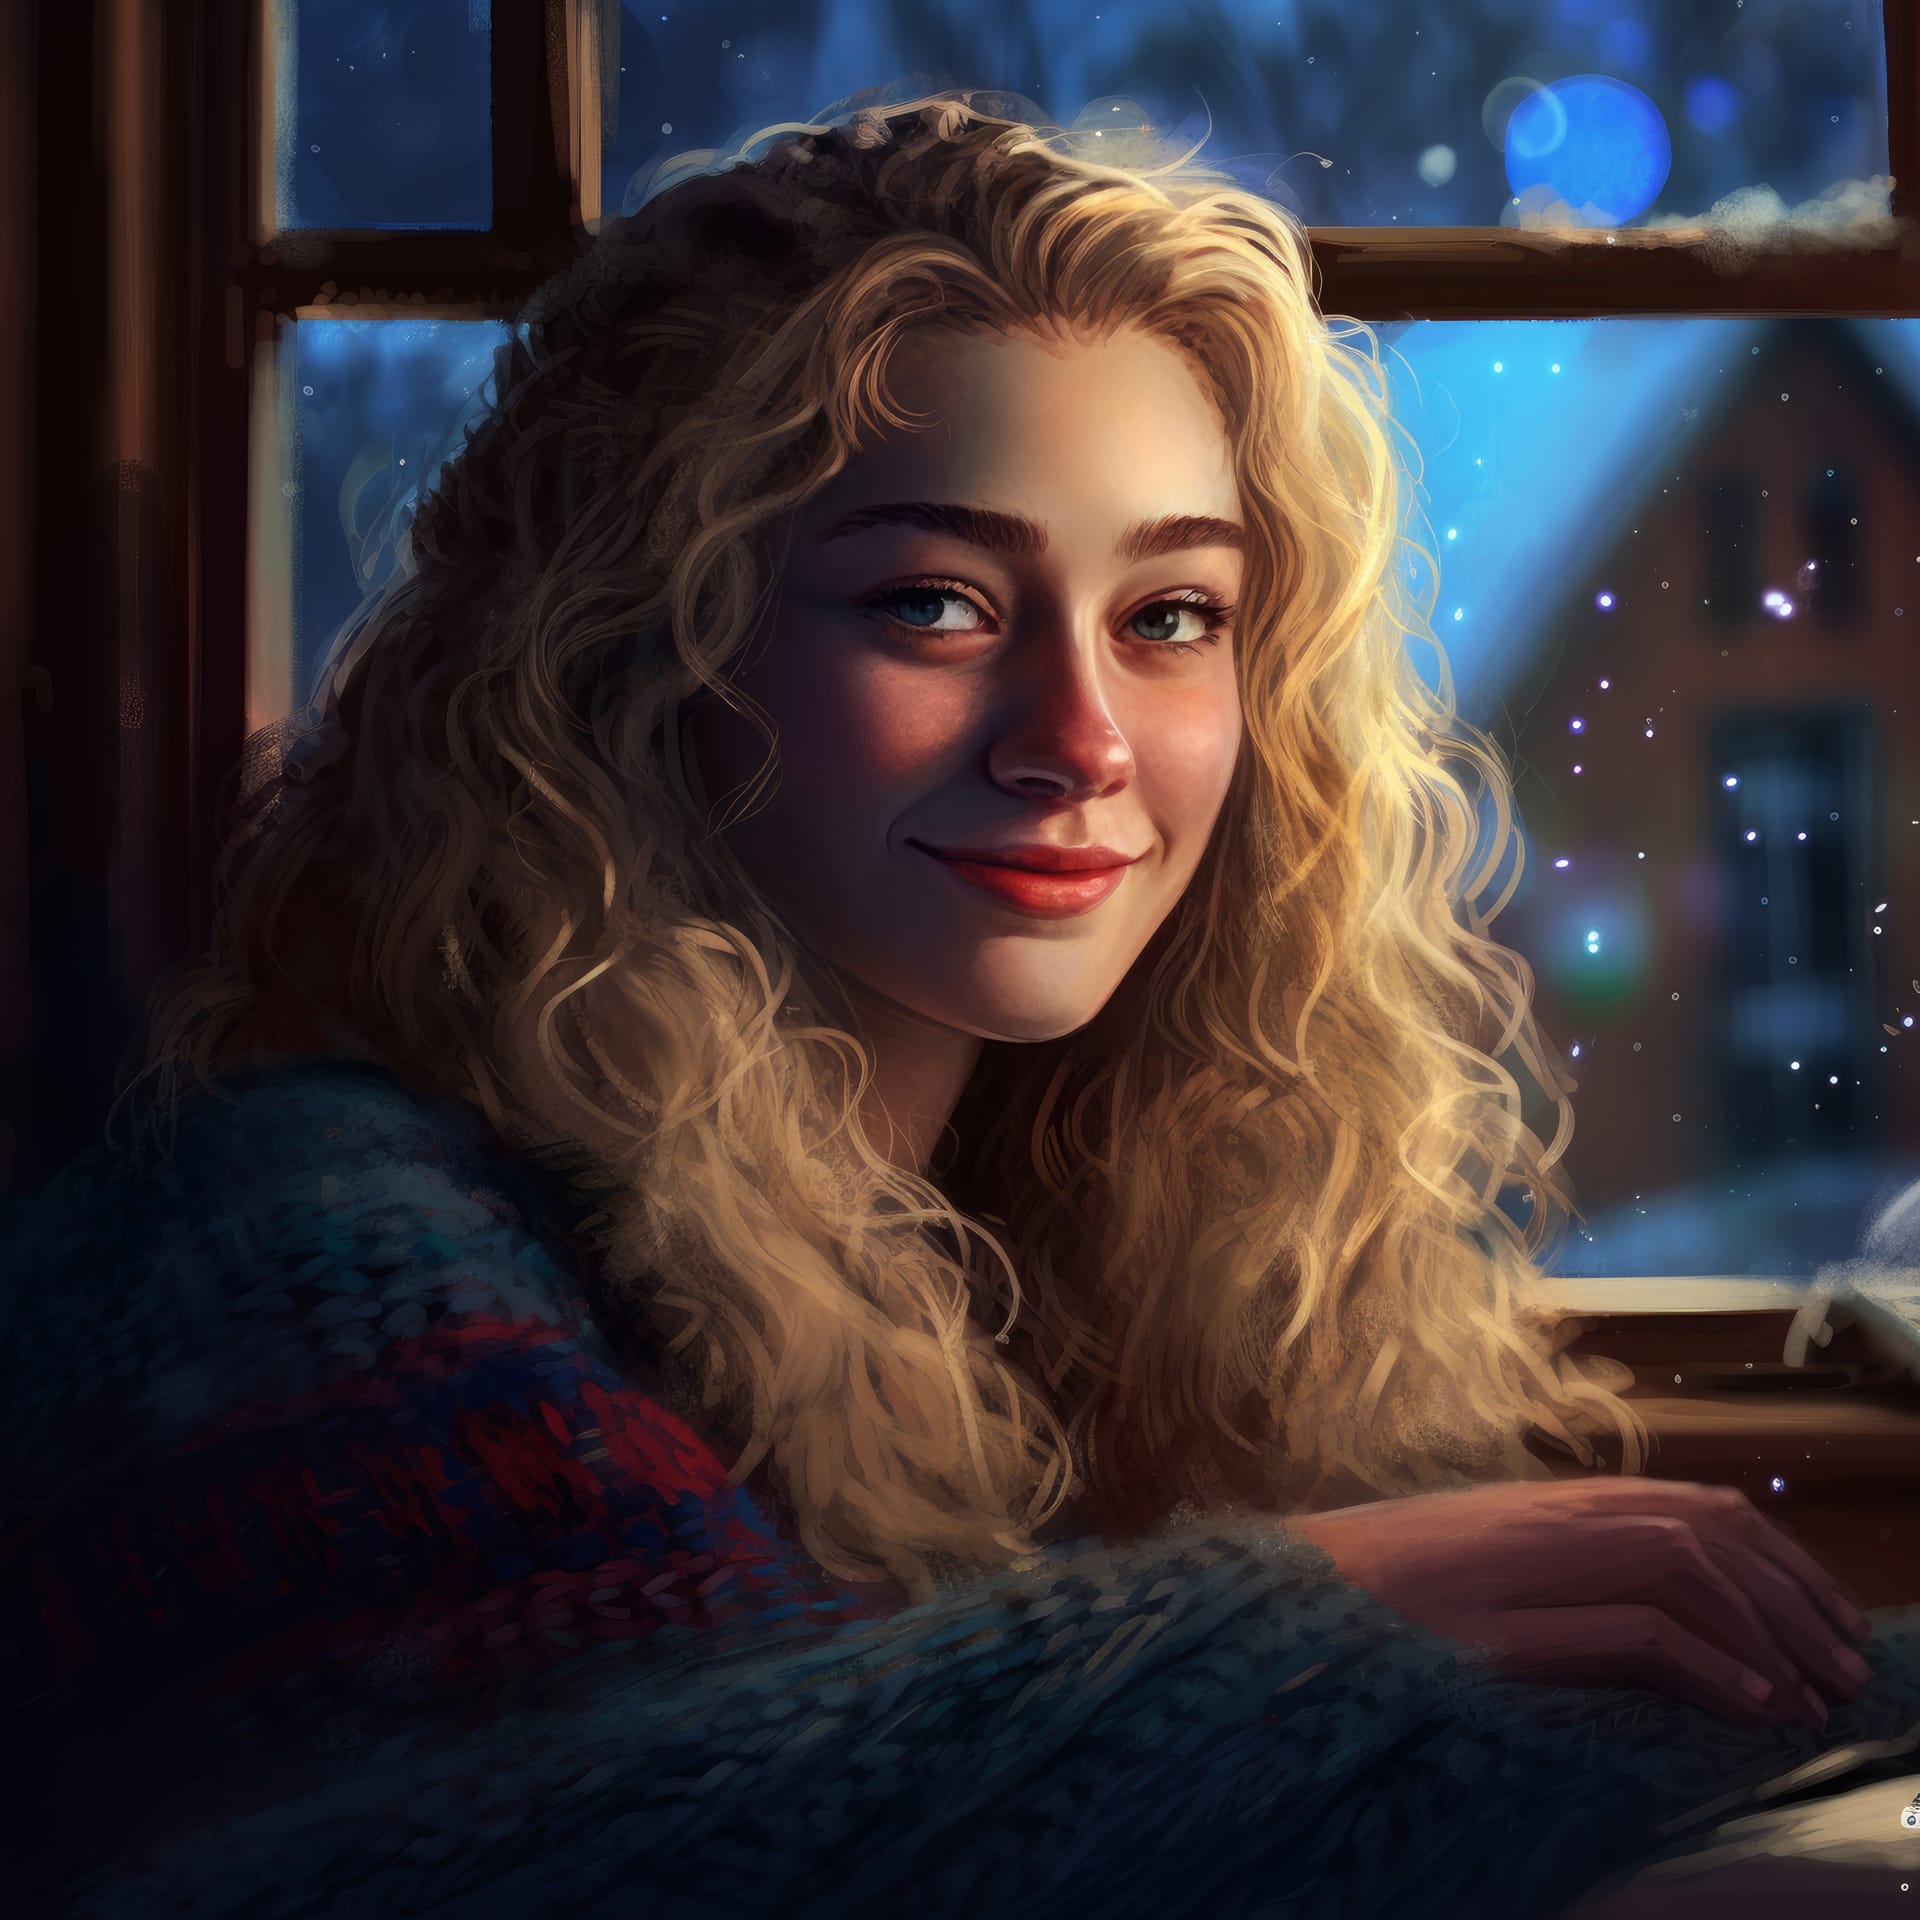 Colorful portrait woman sits window with snow falling